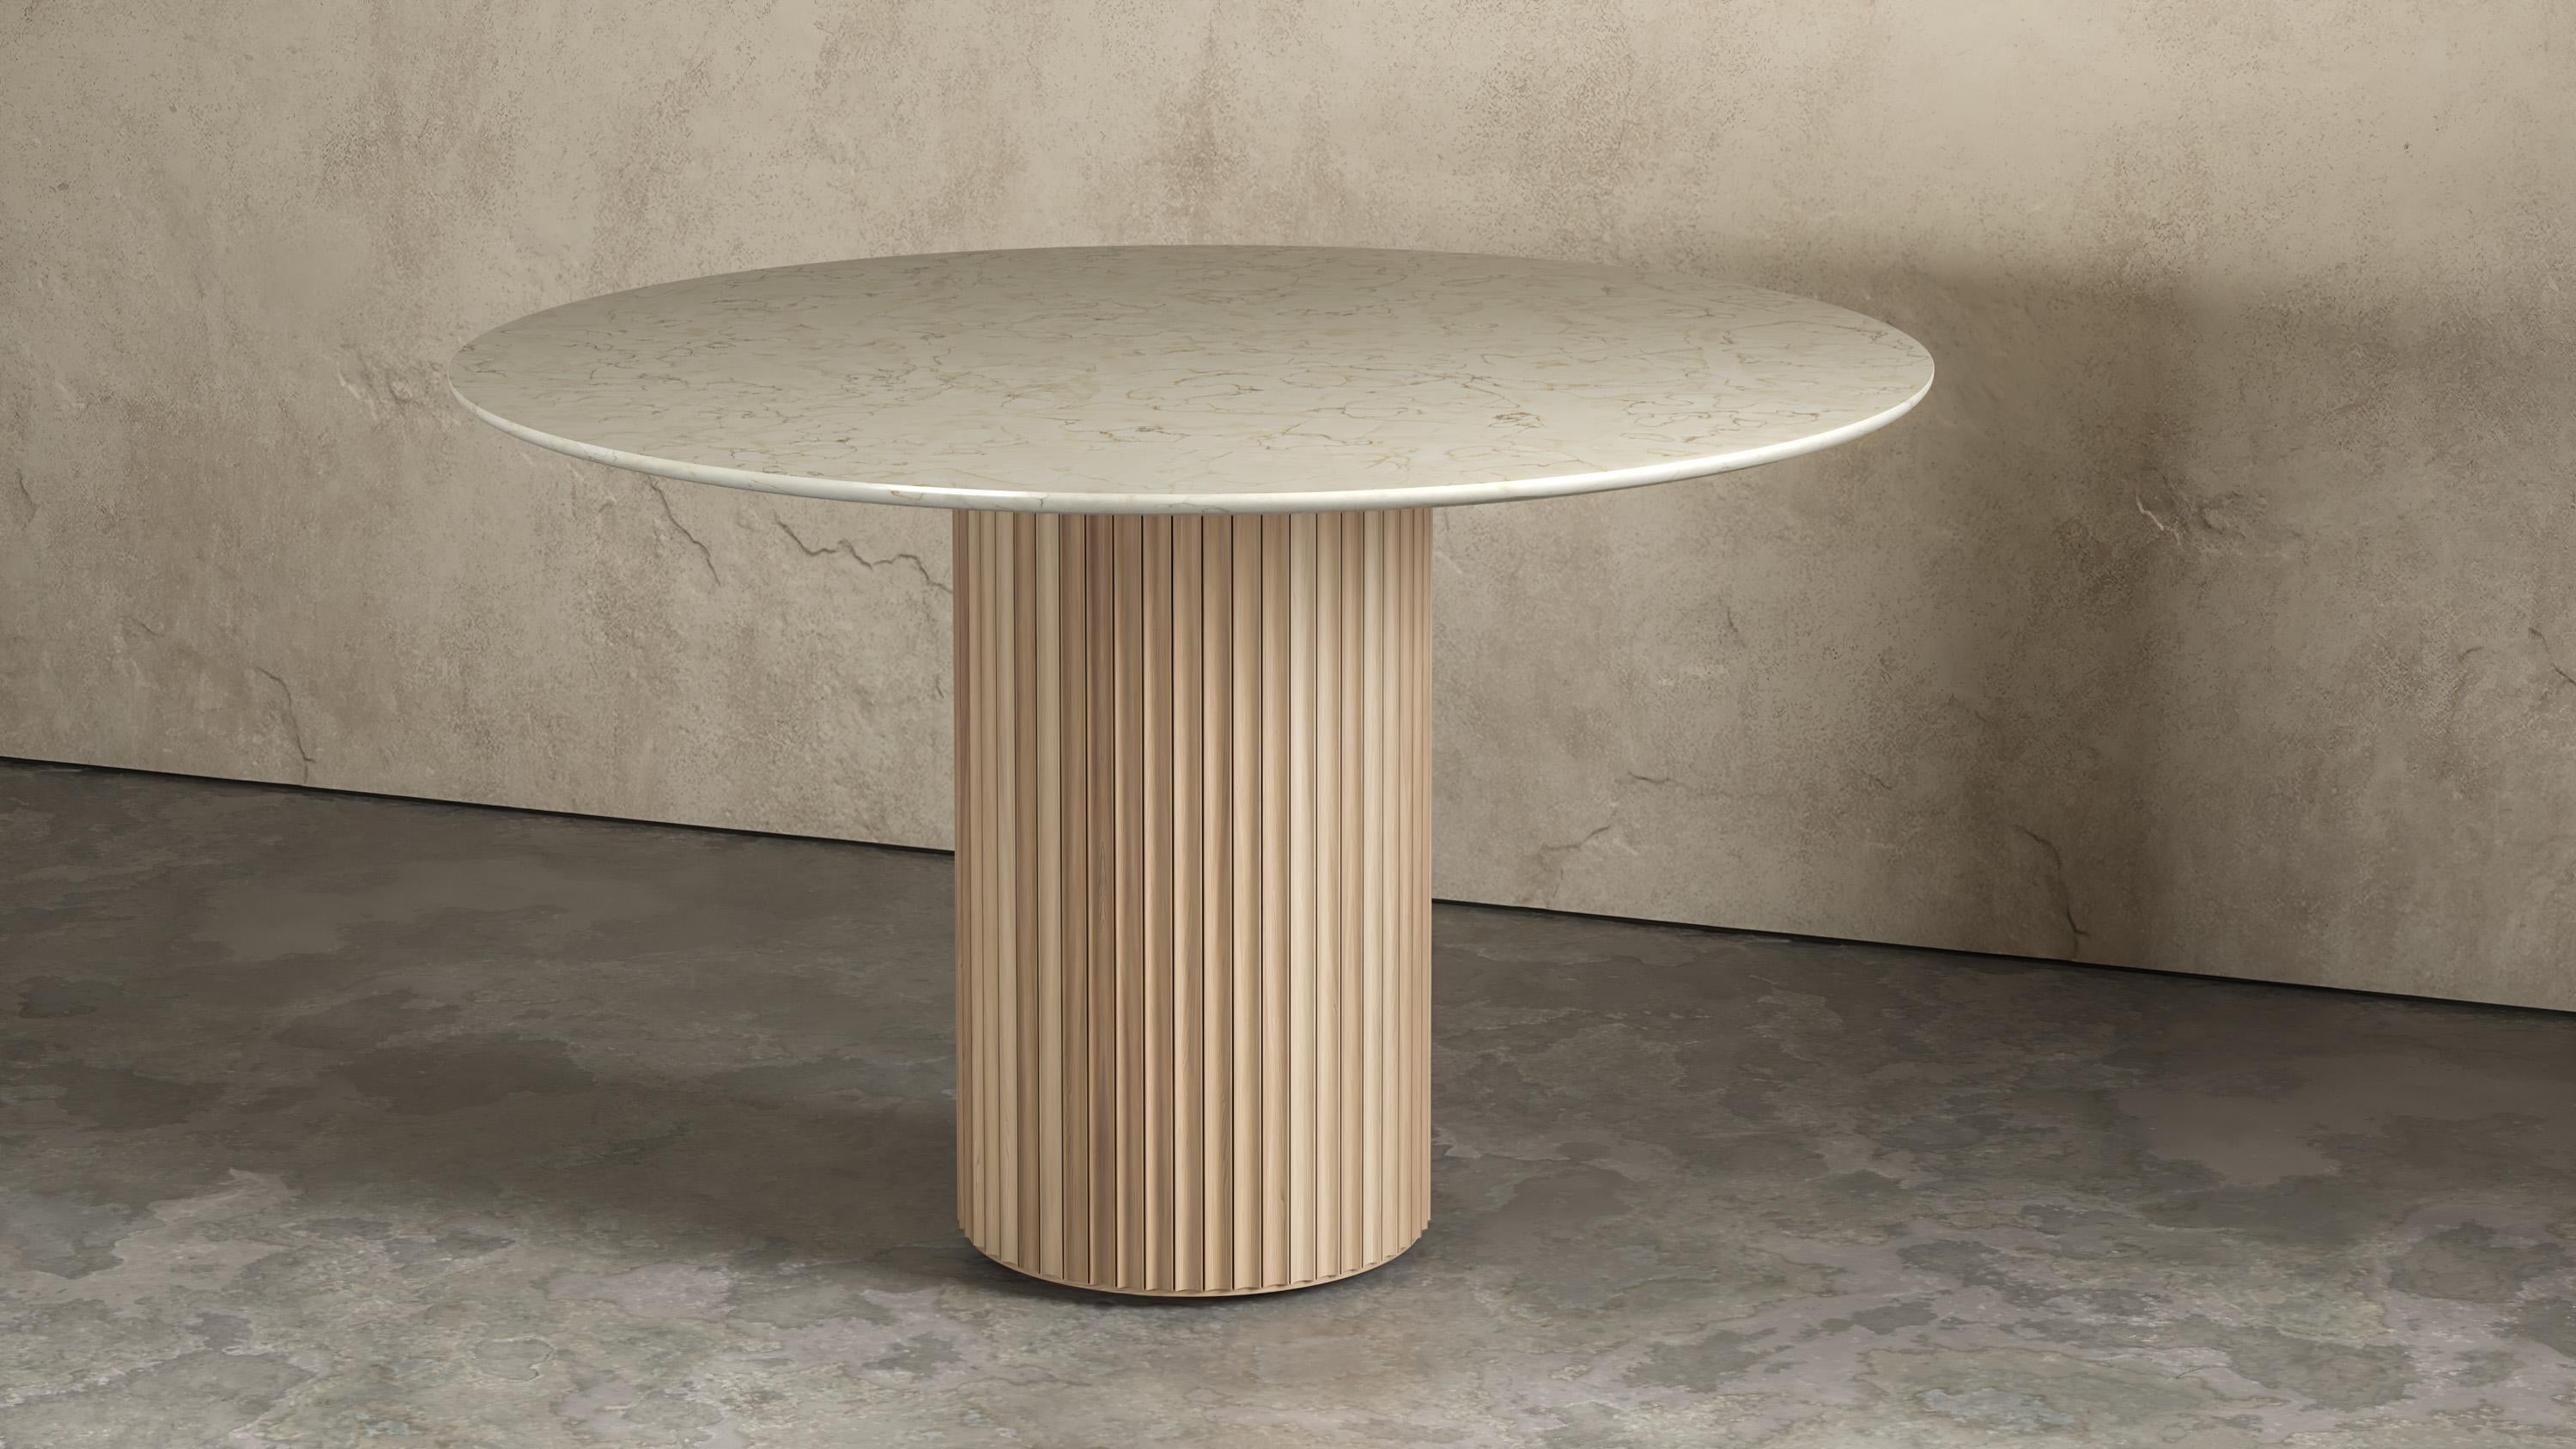 Pilar round white Oak dining table by Indo Made
One of a kind.
Dimensions: Ø122 X 76.2 cm 
Materials: Natural Oak, Crema Marfil Marble Top.

Also available in other materials and finishes. 
Each piece is carefully handcrafted by our team using